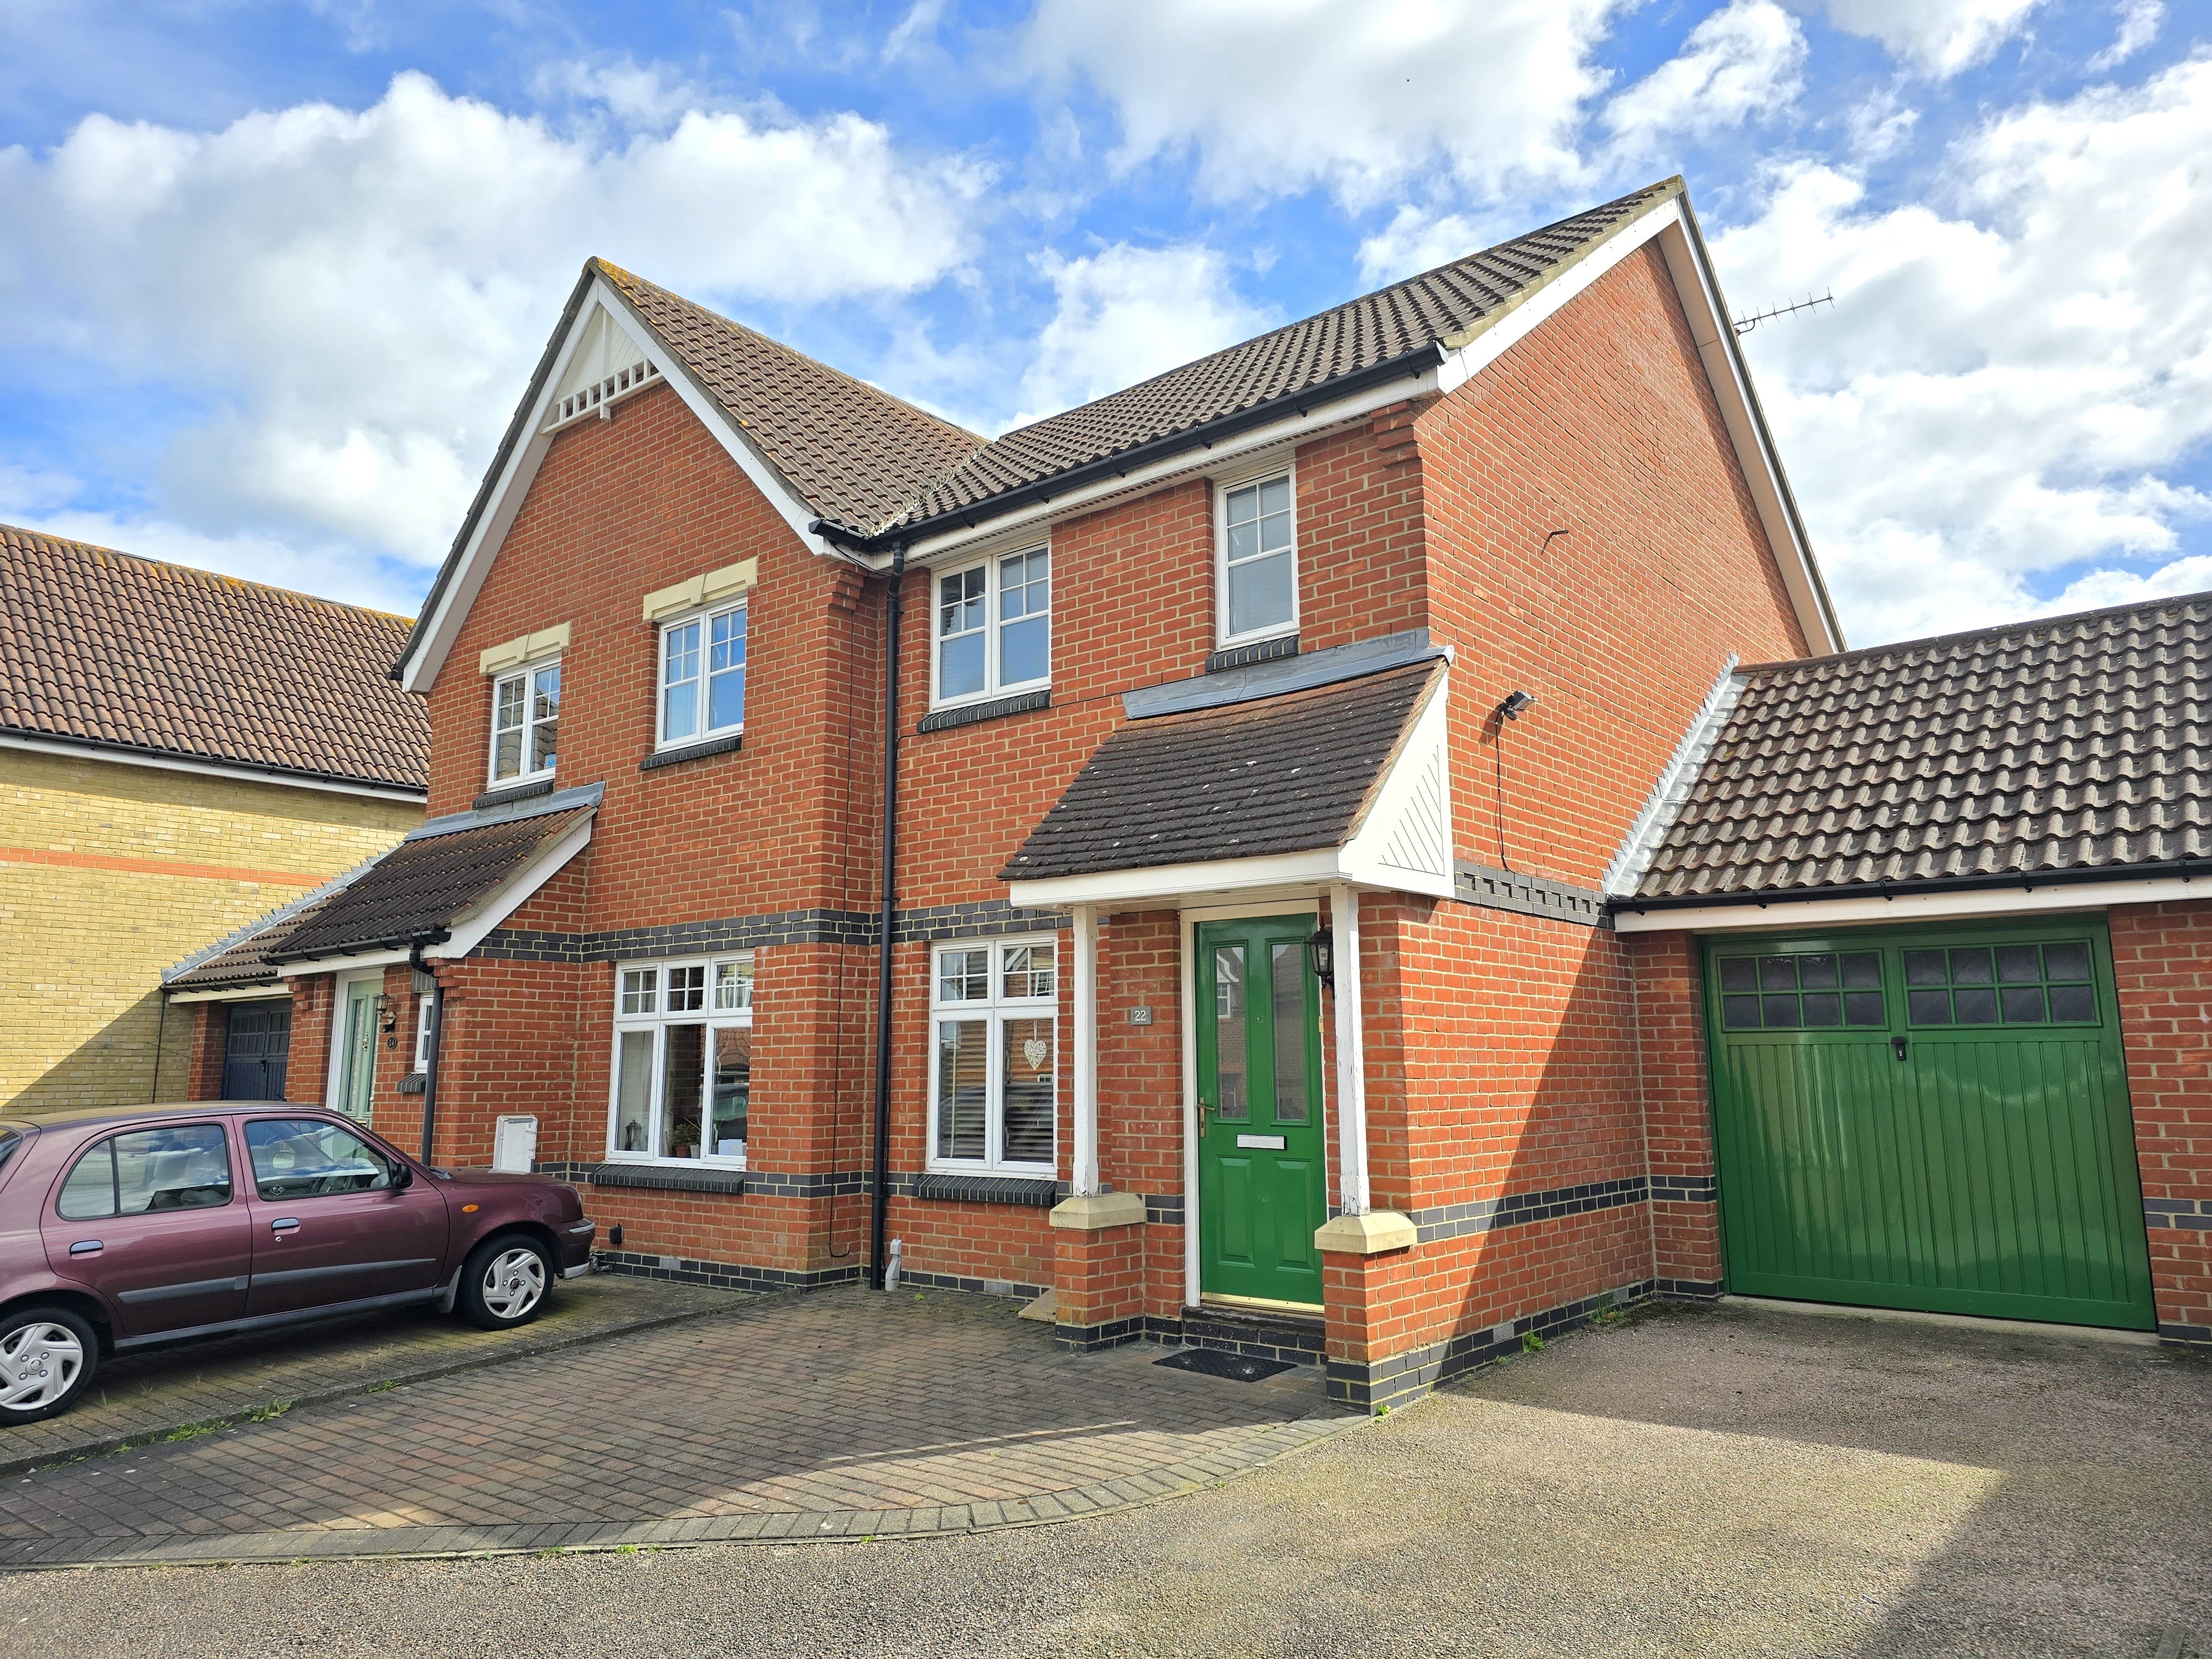 2 bed semi-detached house to rent in Swallow Close, Rayleigh - Property Image 1